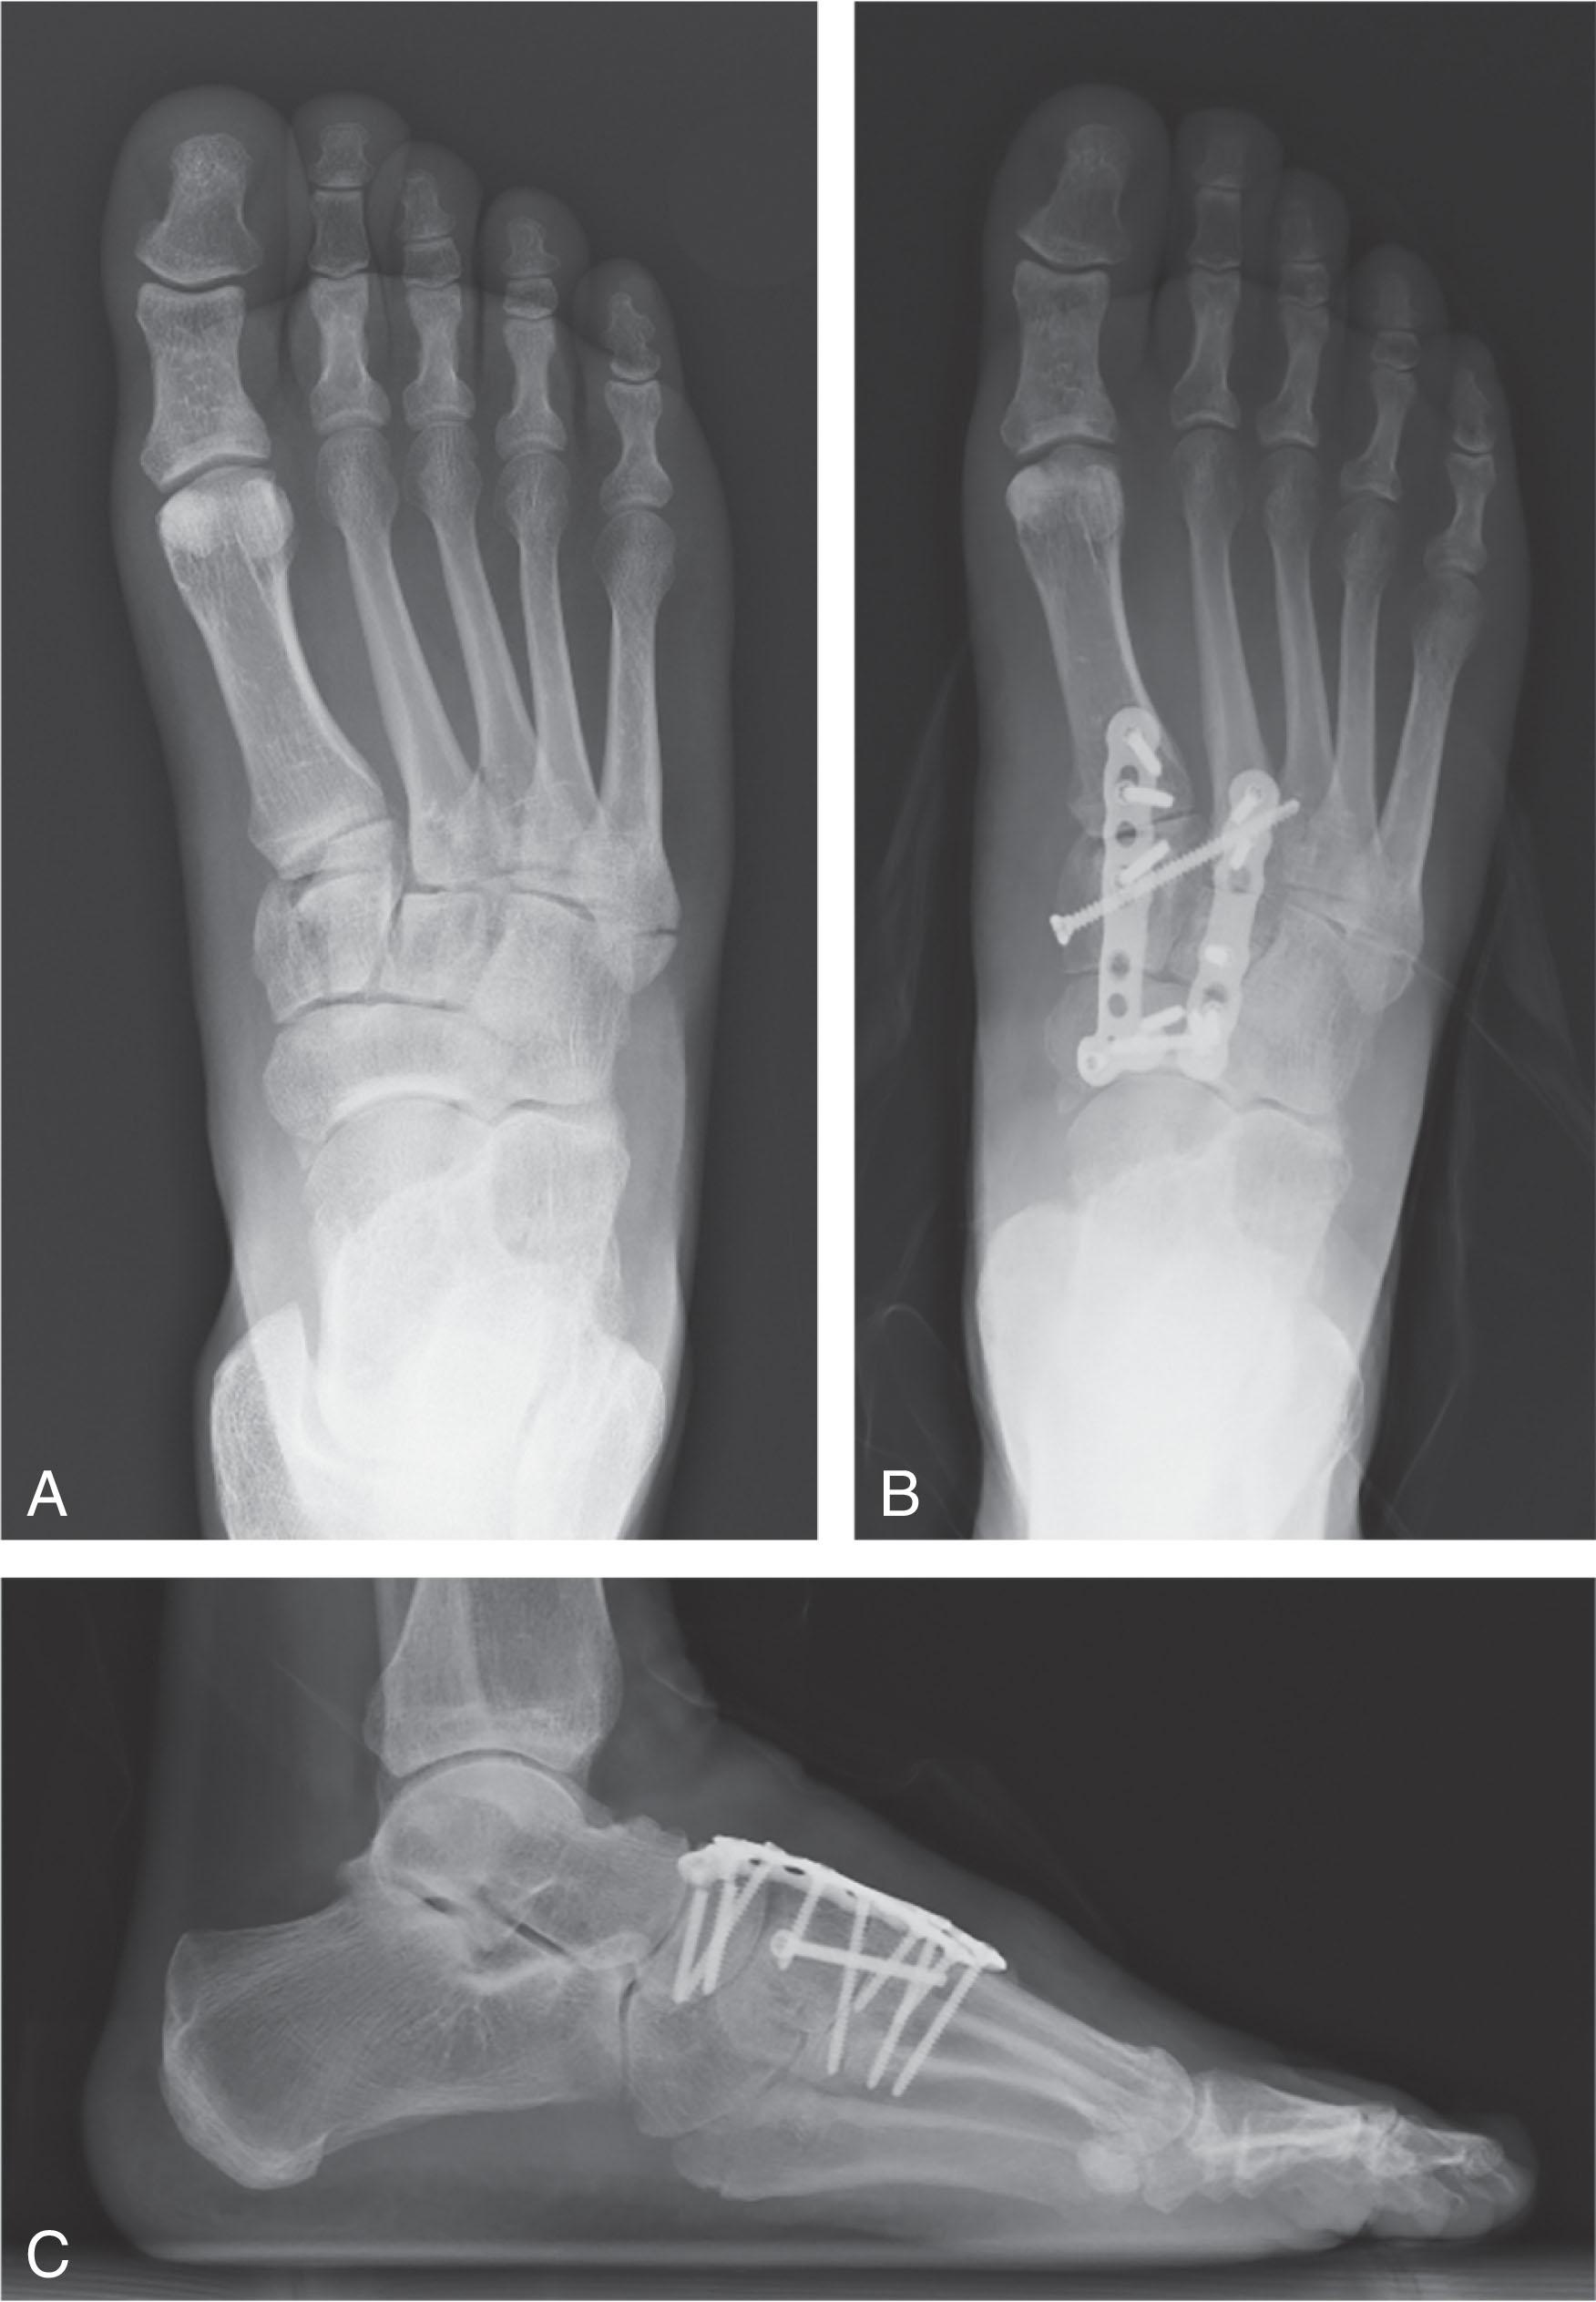 Fig. 47-15, A , Injury radiographs revealing a Lisfranc variant with a comminuted length unstable medial cuneiform fracture. B and C , This was treated with length restoration and bridge plating of the medial and intermediate column.